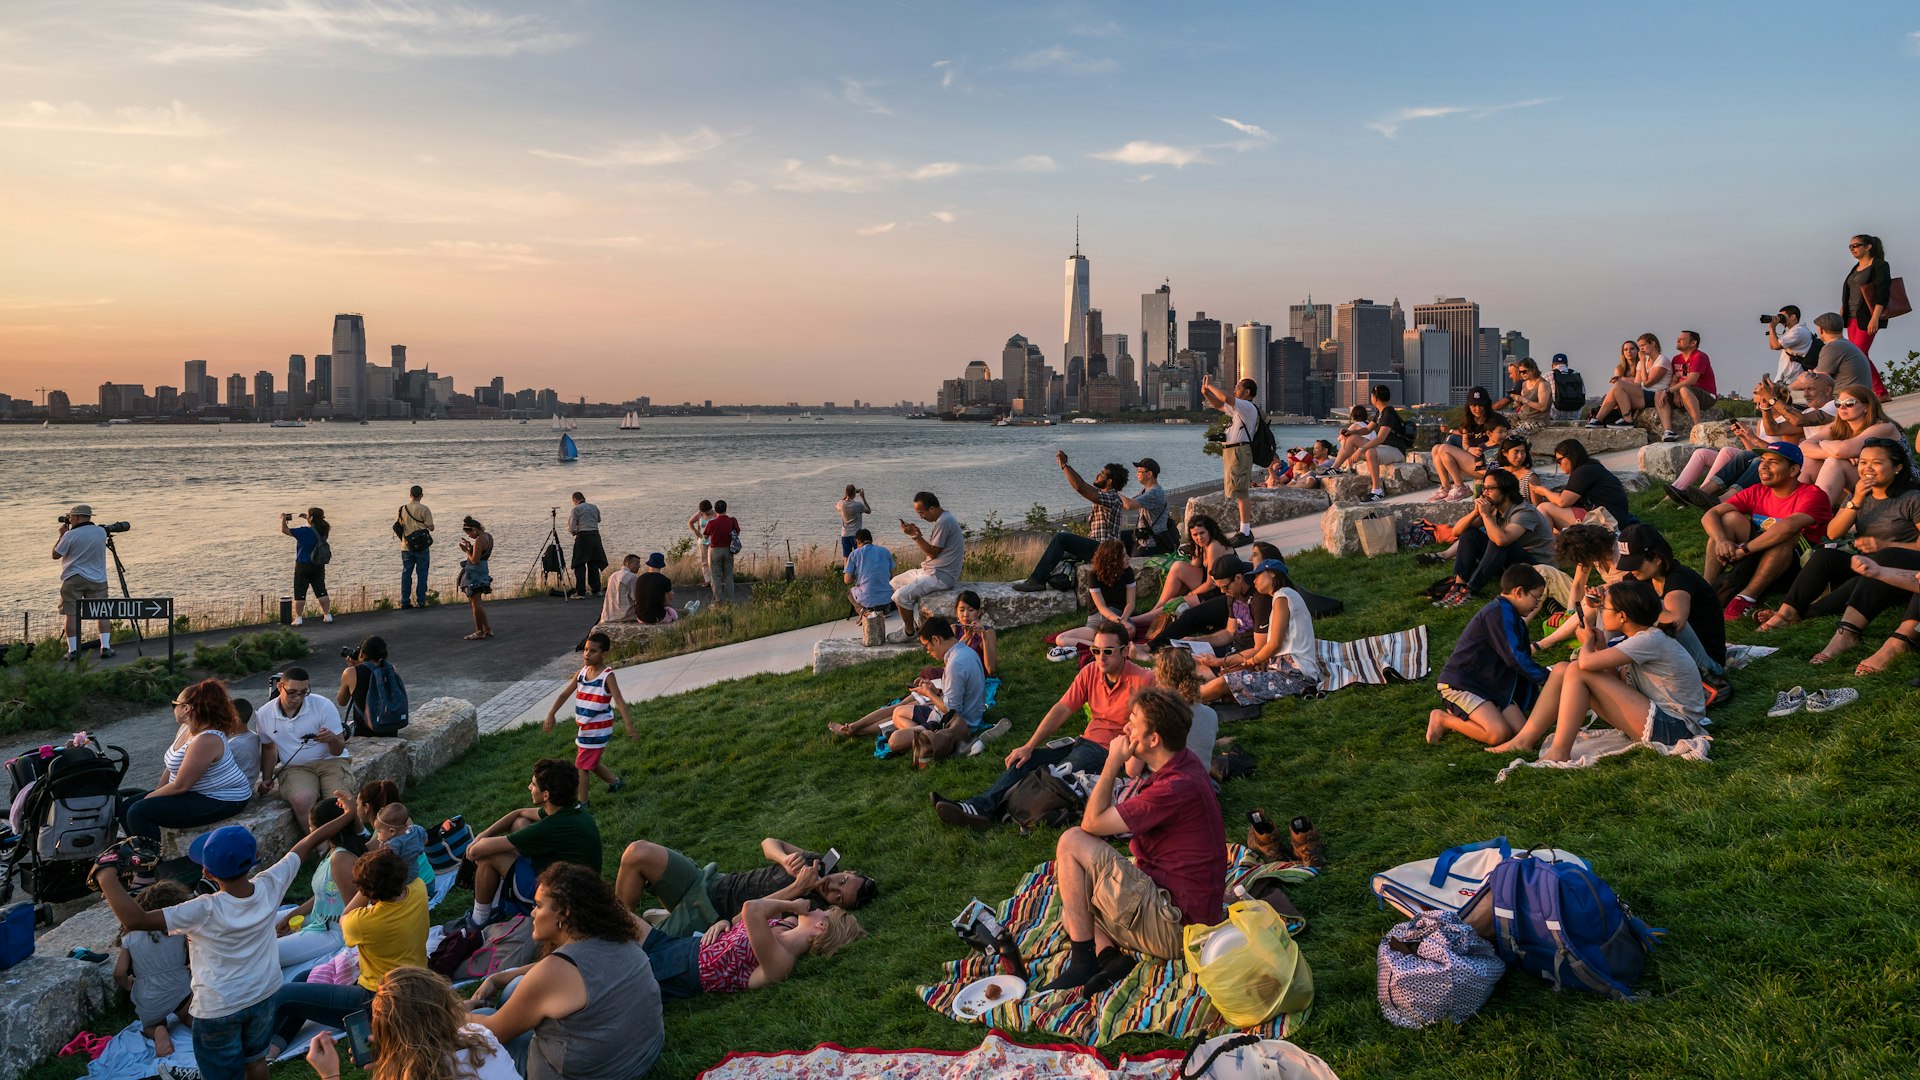 A crowd of people sitting on blankets watch the sunset from Governors Island with the New York City skyline in the background